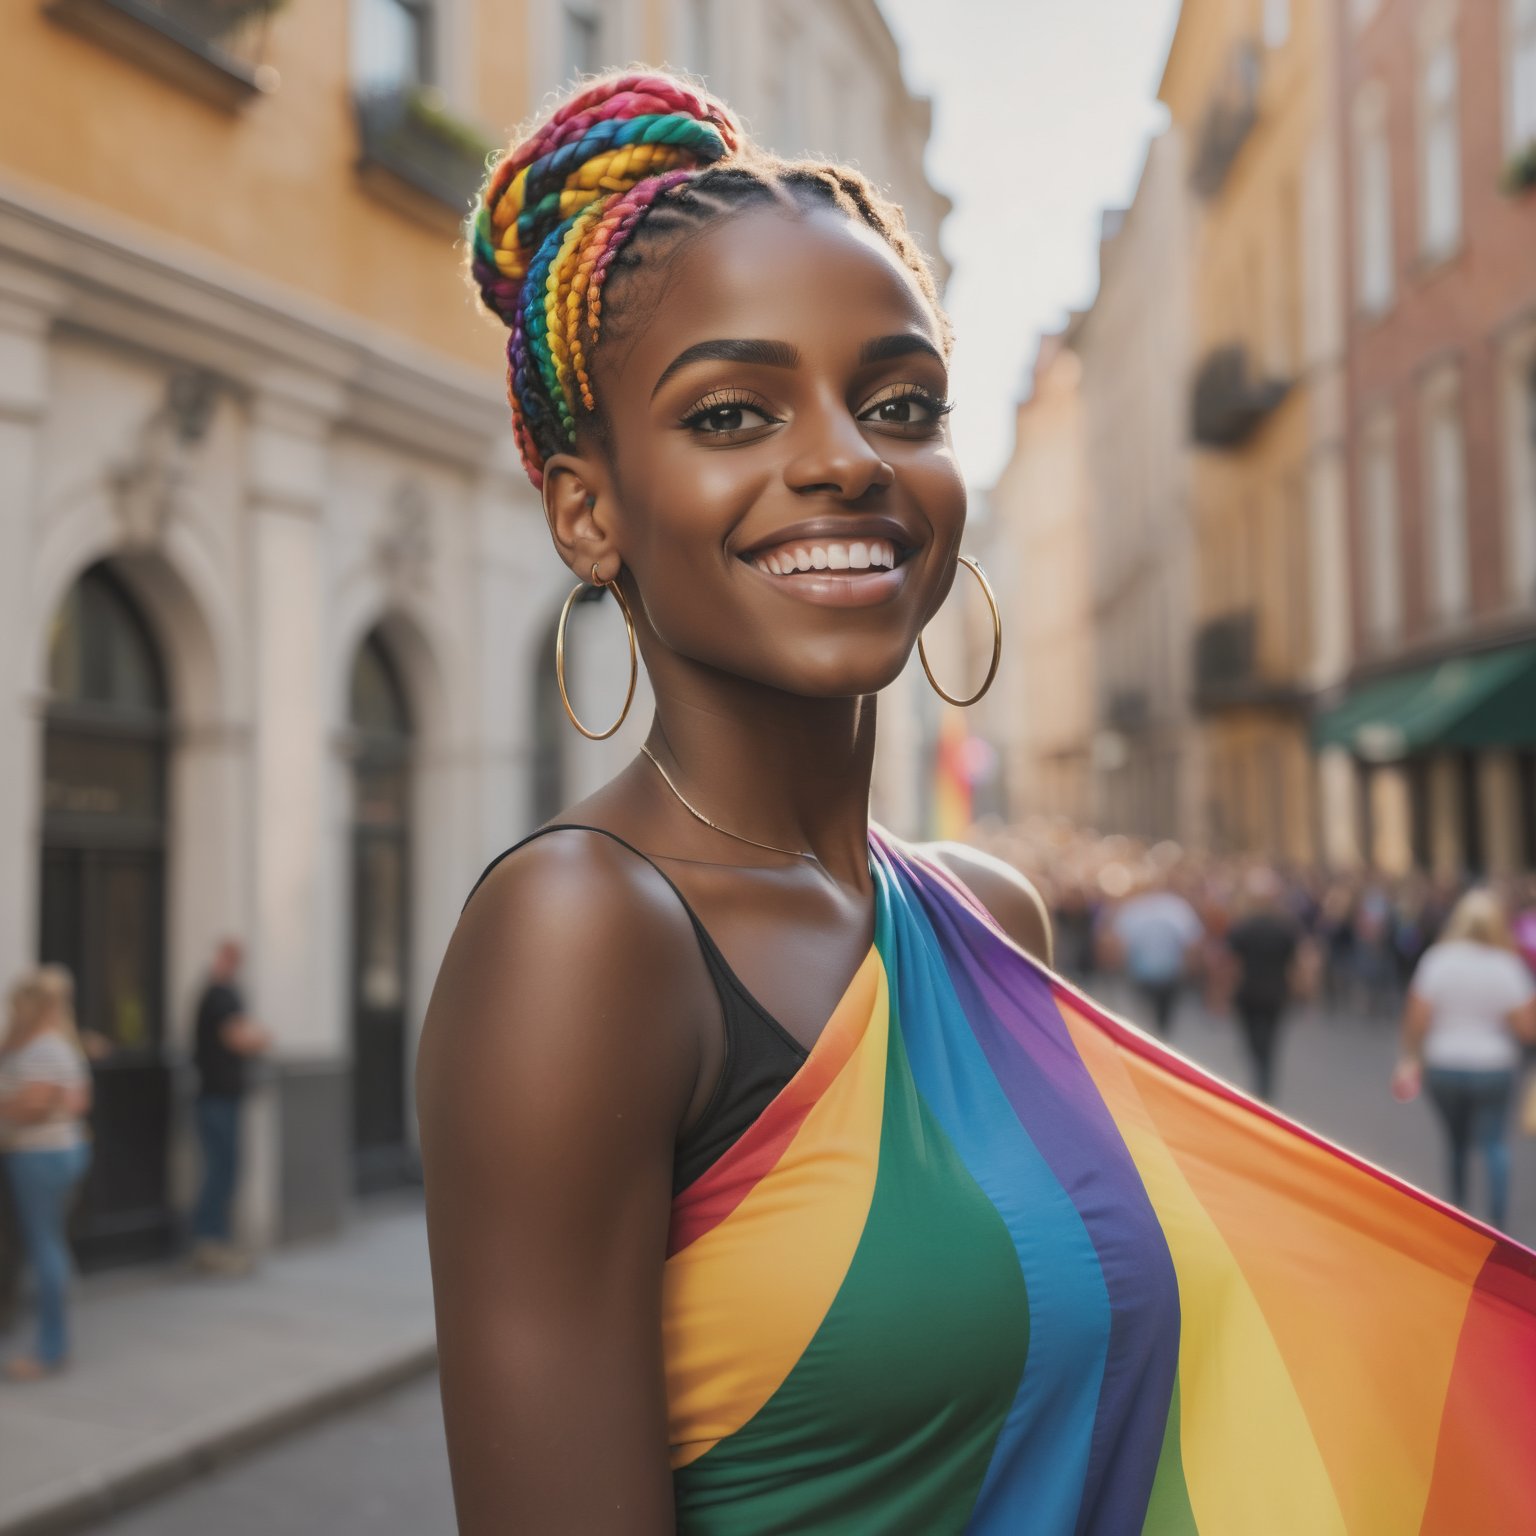 A joyful young woman stands outdoors in an urban setting, proudly holding up a large rainbow pride flag behind her. She has dark skin, bright eyes, and a wide smile. Her hair is styled in long, intricate braids, some of which are wrapped into a high bun on top of her head. She is wearing a black top and large hoop earrings. The background features tall buildings and a city street, slightly out of focus, giving the image a vibrant, celebratory atmosphere. The sunlight illuminates her face and the flag, emphasizing the colorful stripes of the flag and her enthusiastic expression.